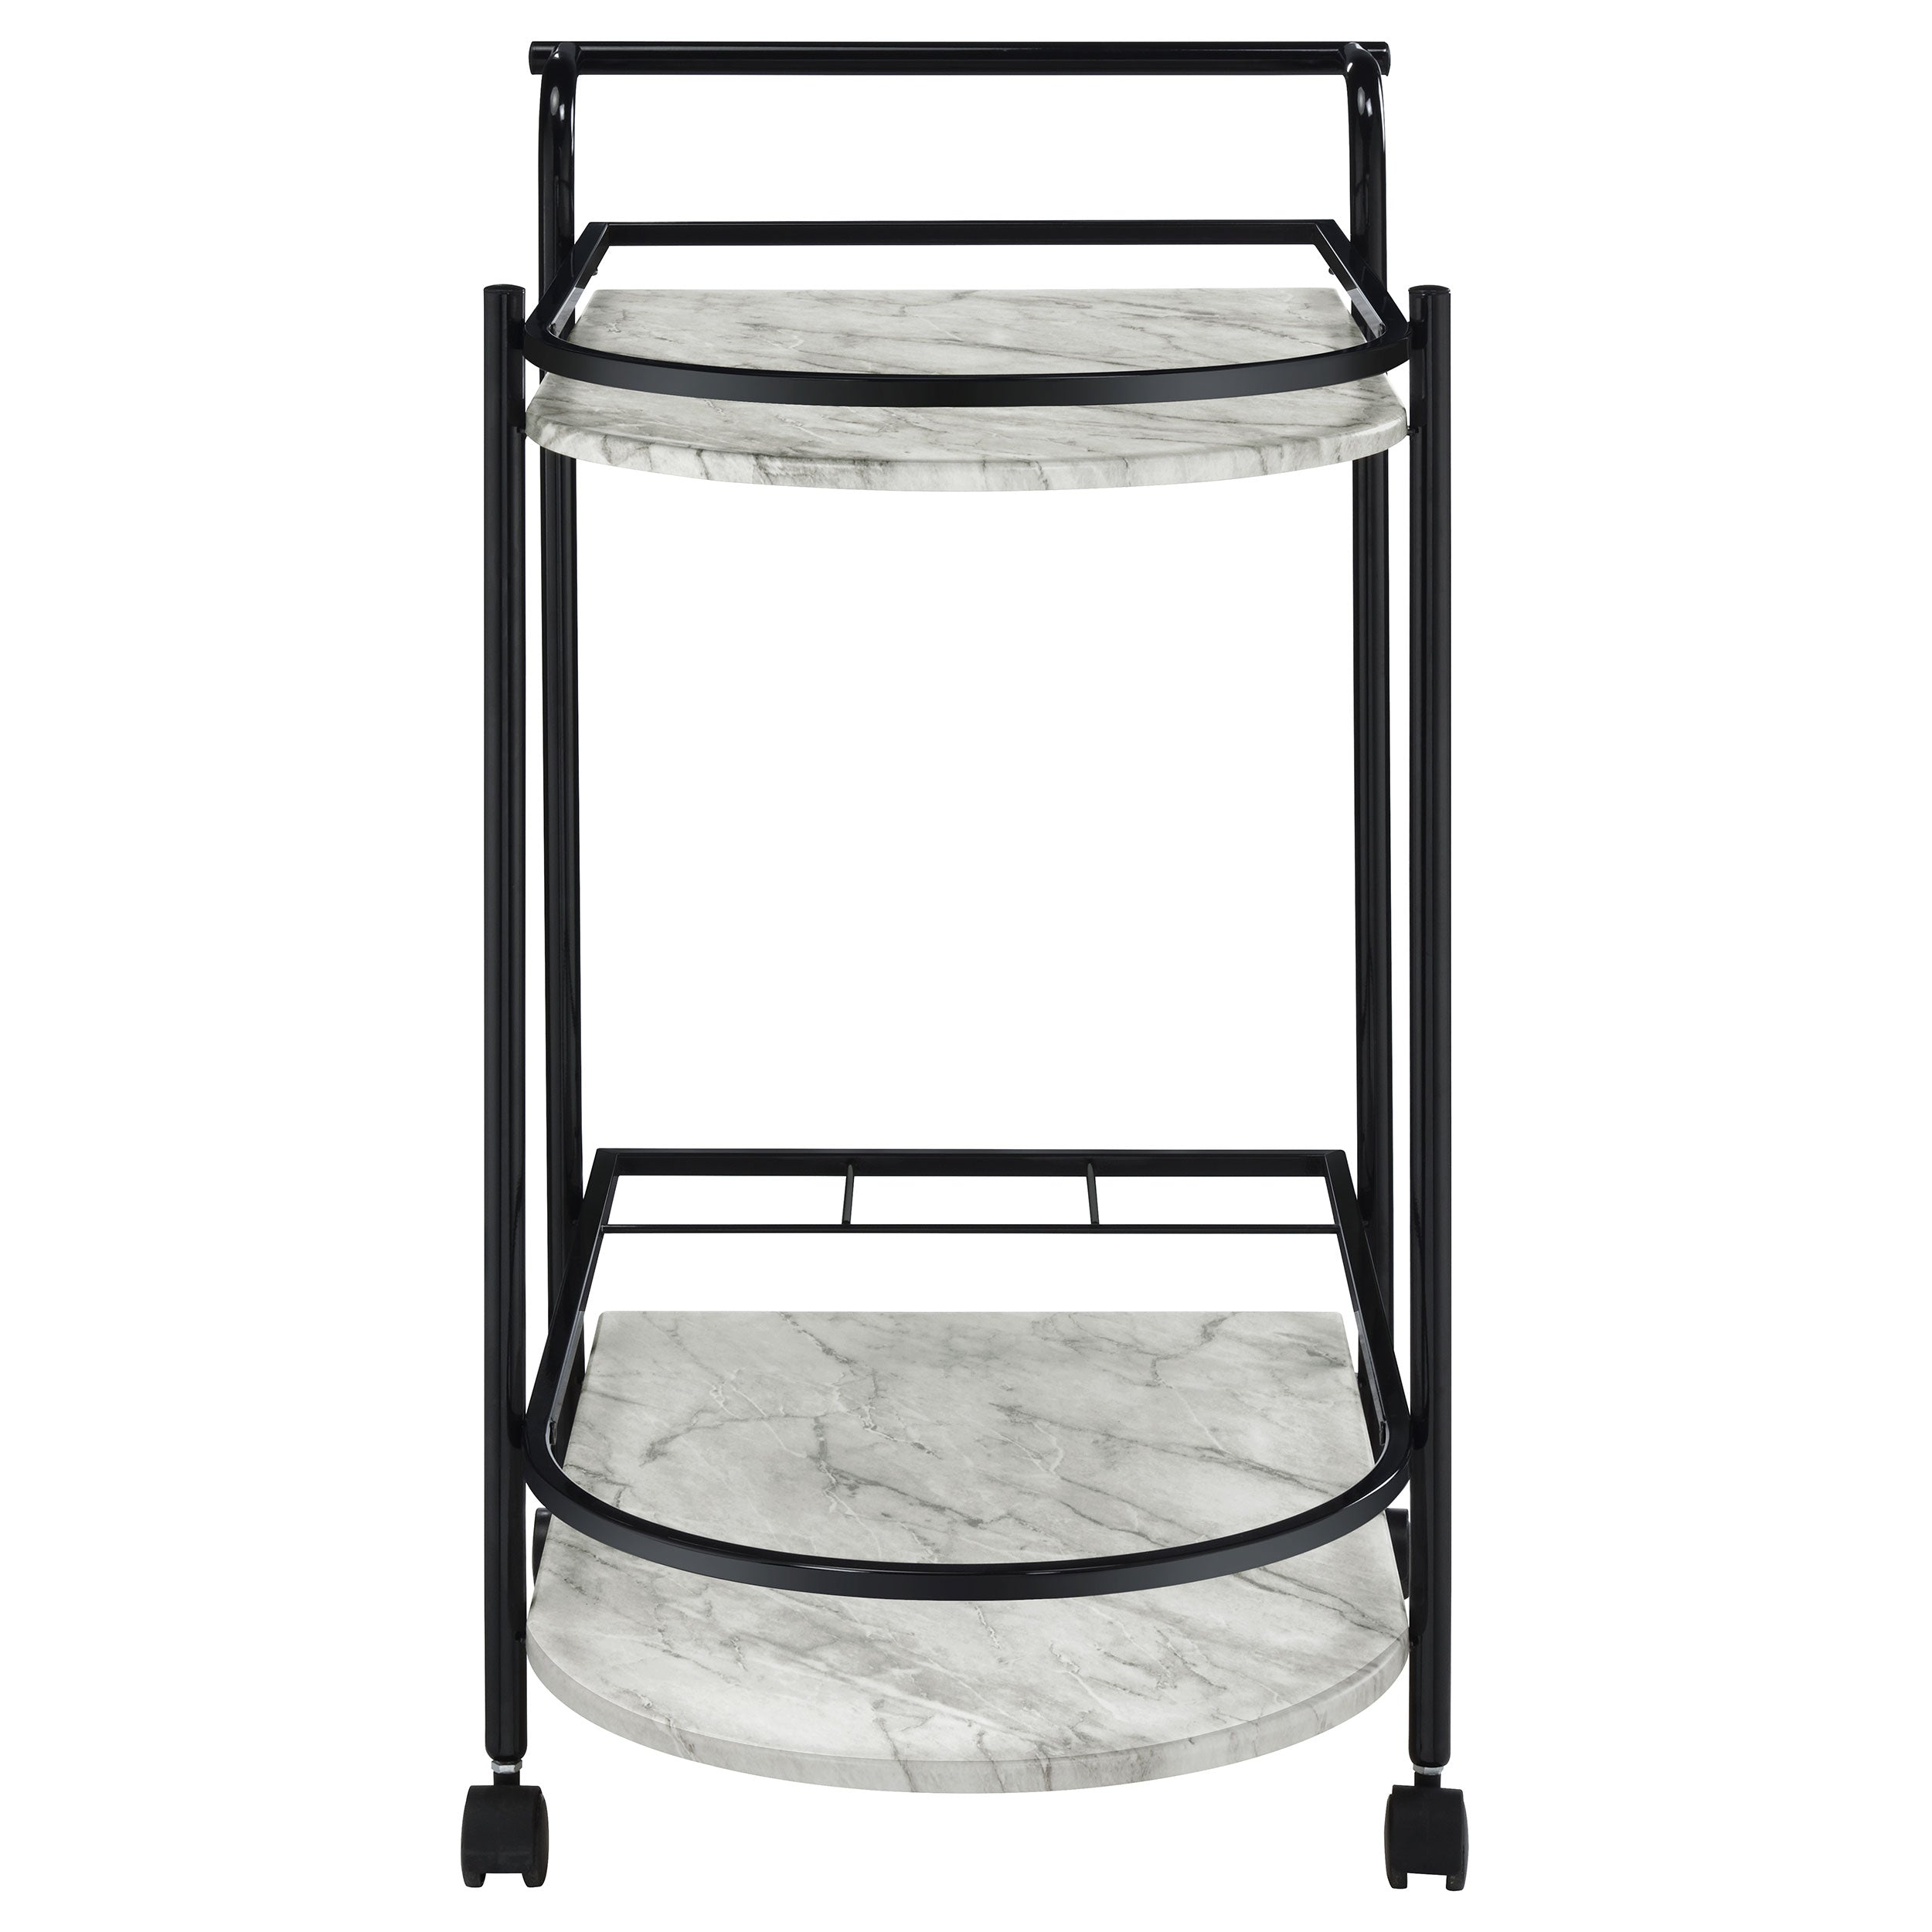 Desiree 2-tier Bar Cart with Casters Black